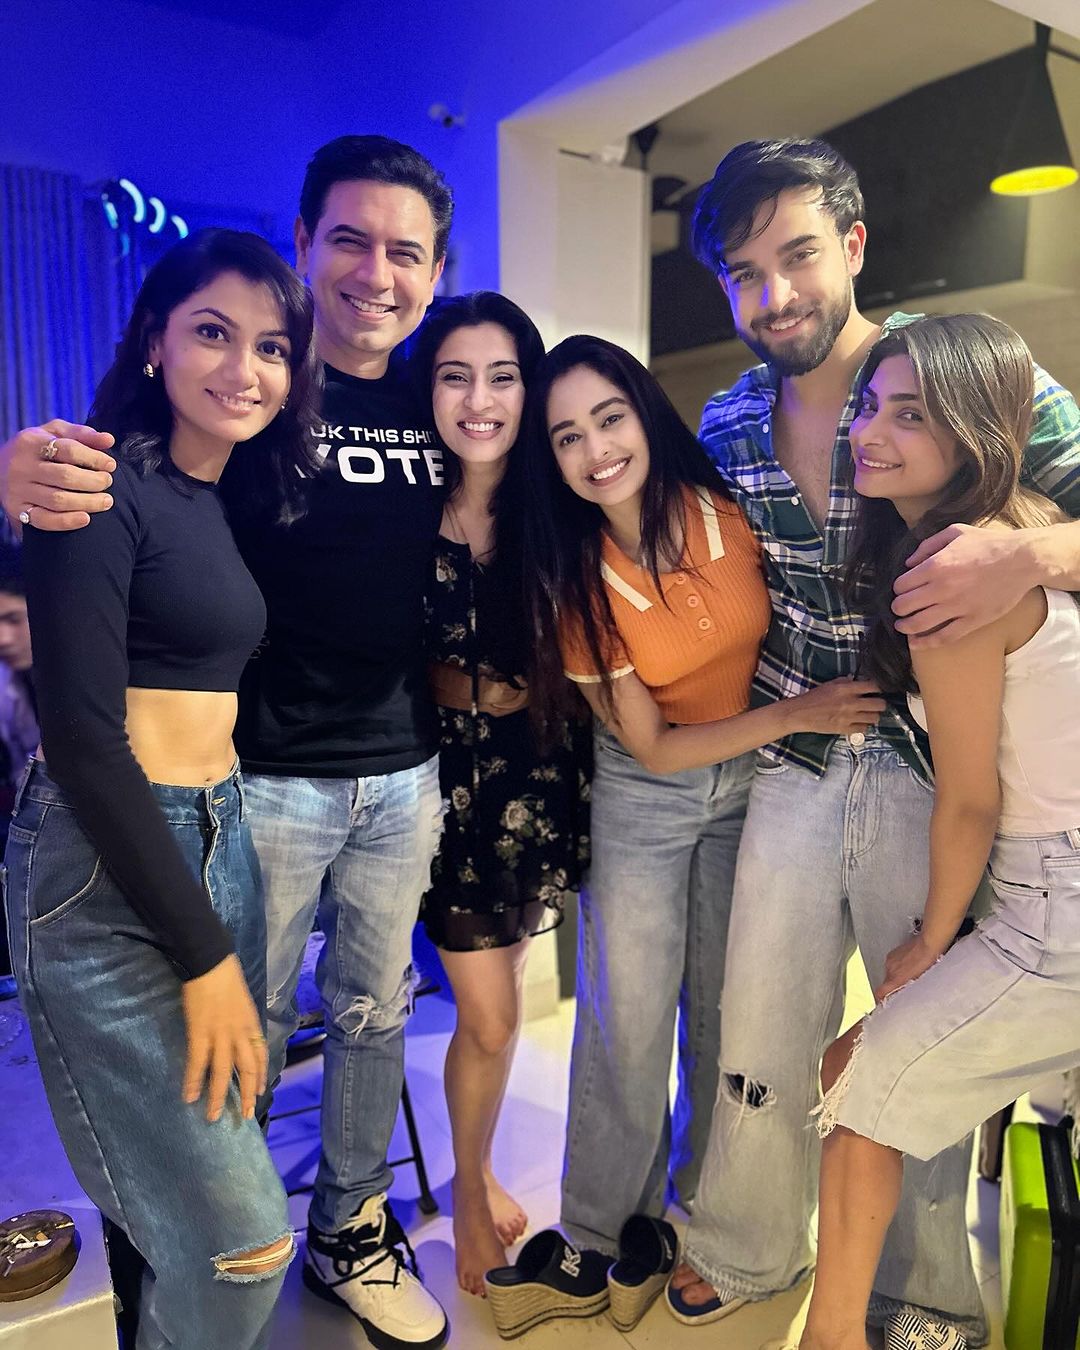 It’s A Reunion Time! Most Popular Drama Series Kumkum Bhagya’s Co-Actors Are Spotted Togther. Check About Their Happy Vibes!